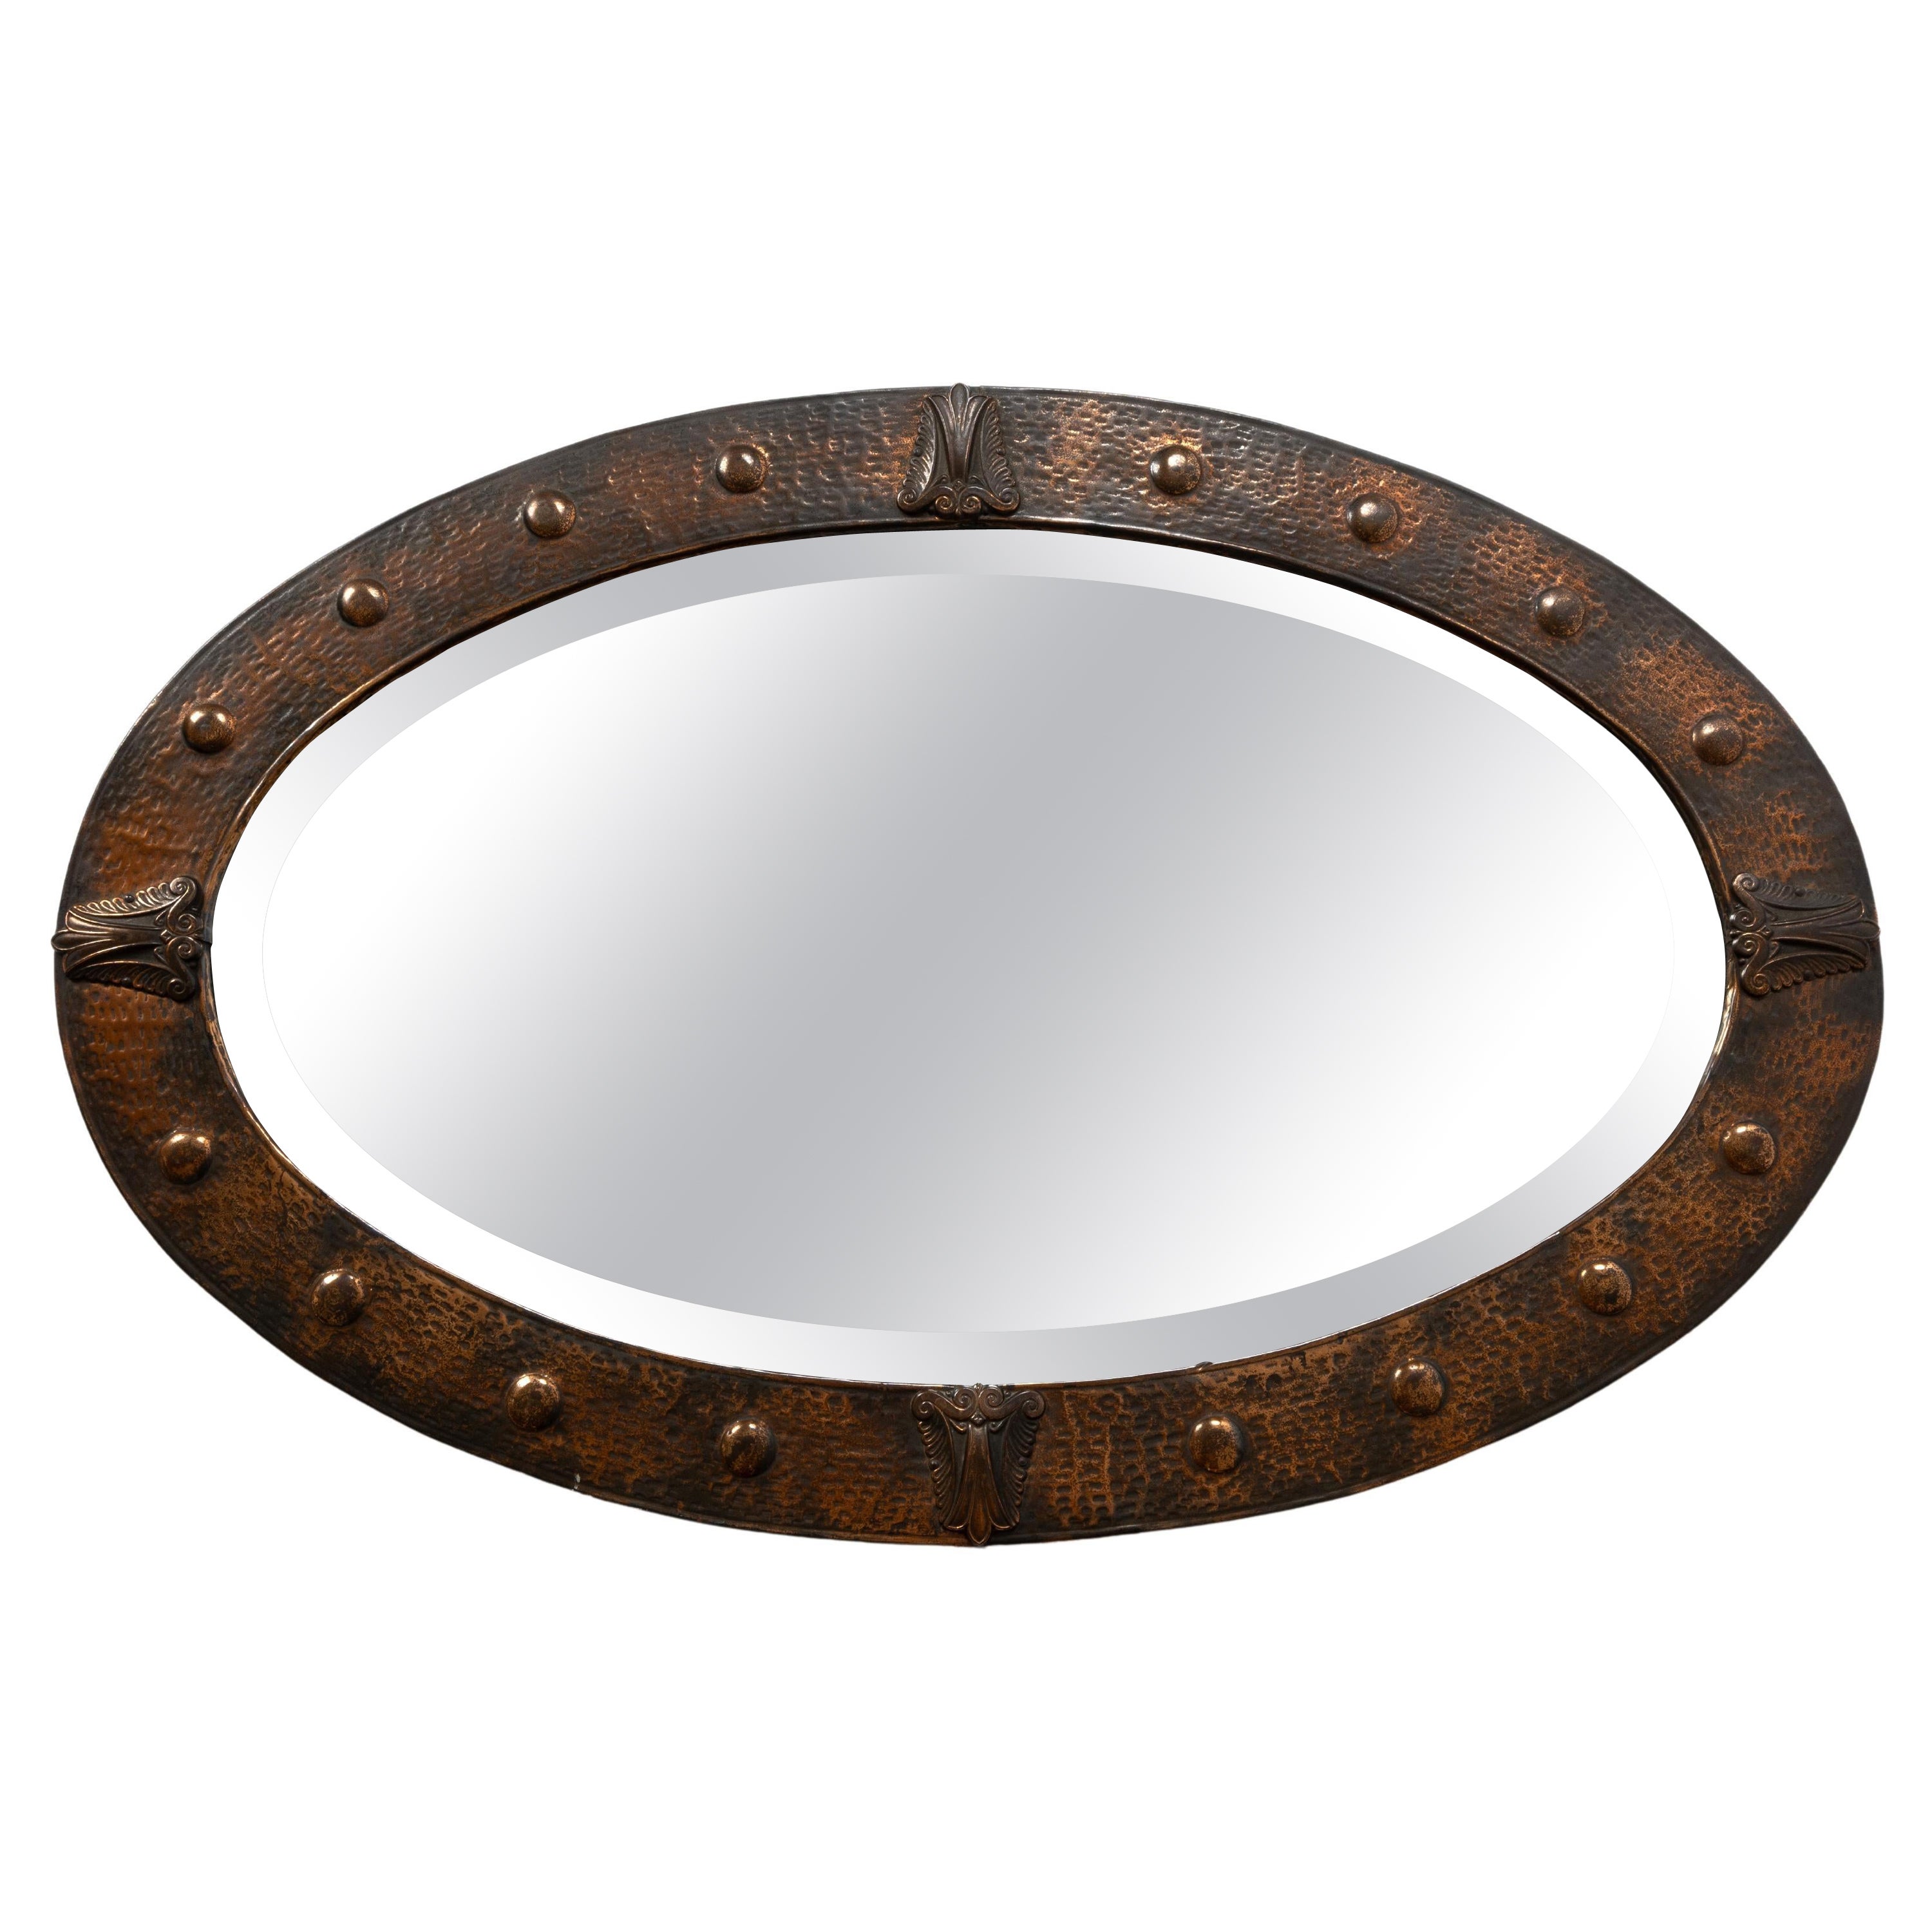 English Arts & Crafts hammered Copper Oval Mirror, Liberty Of London